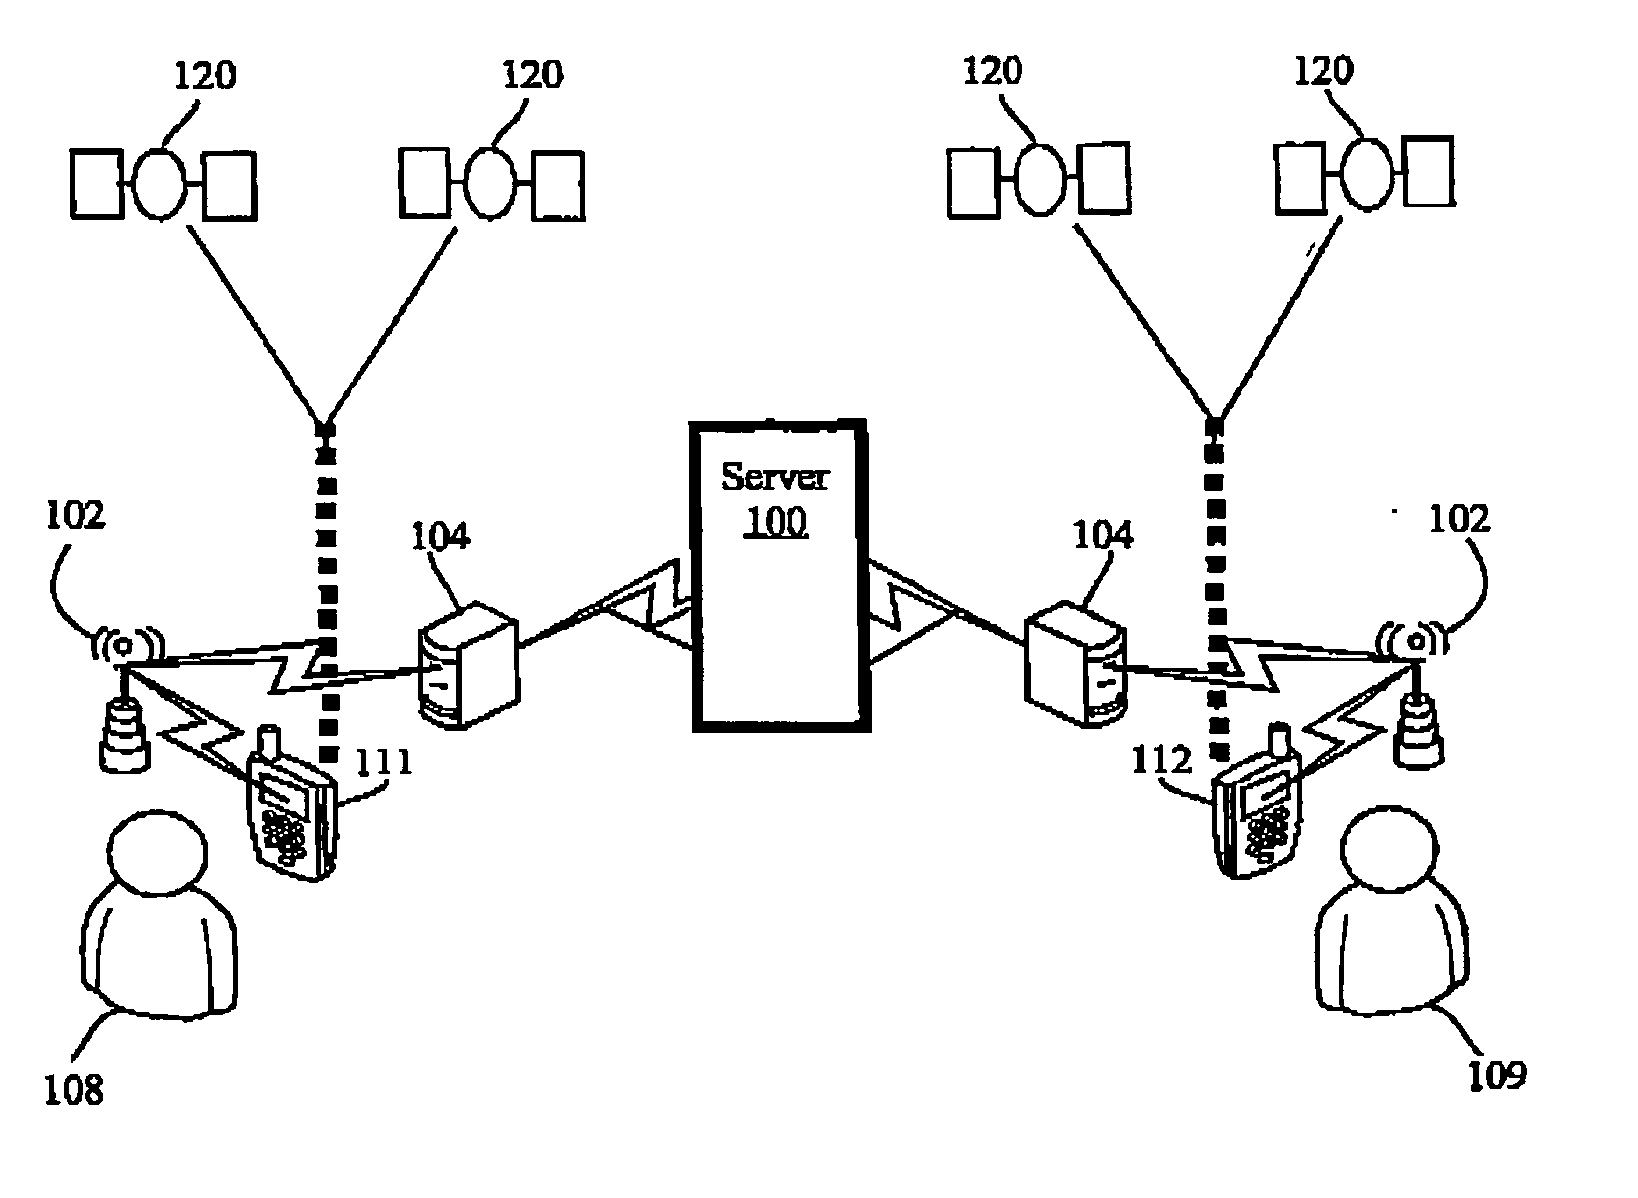 Meeting locator system and method of using the same